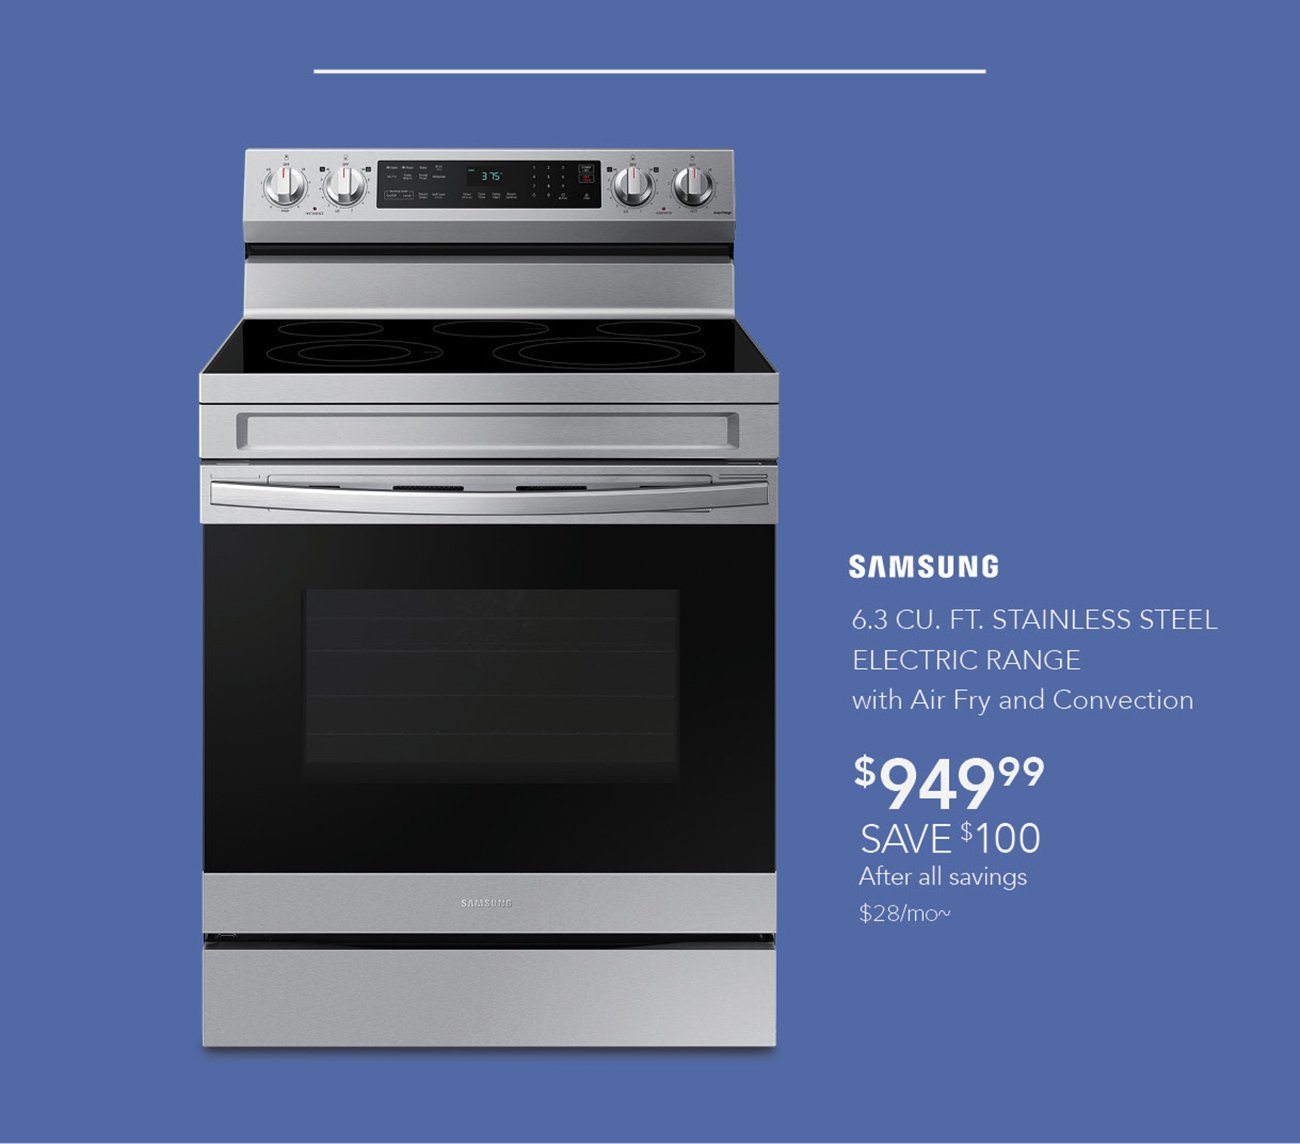 Samsung-stainless-steel-electric-range